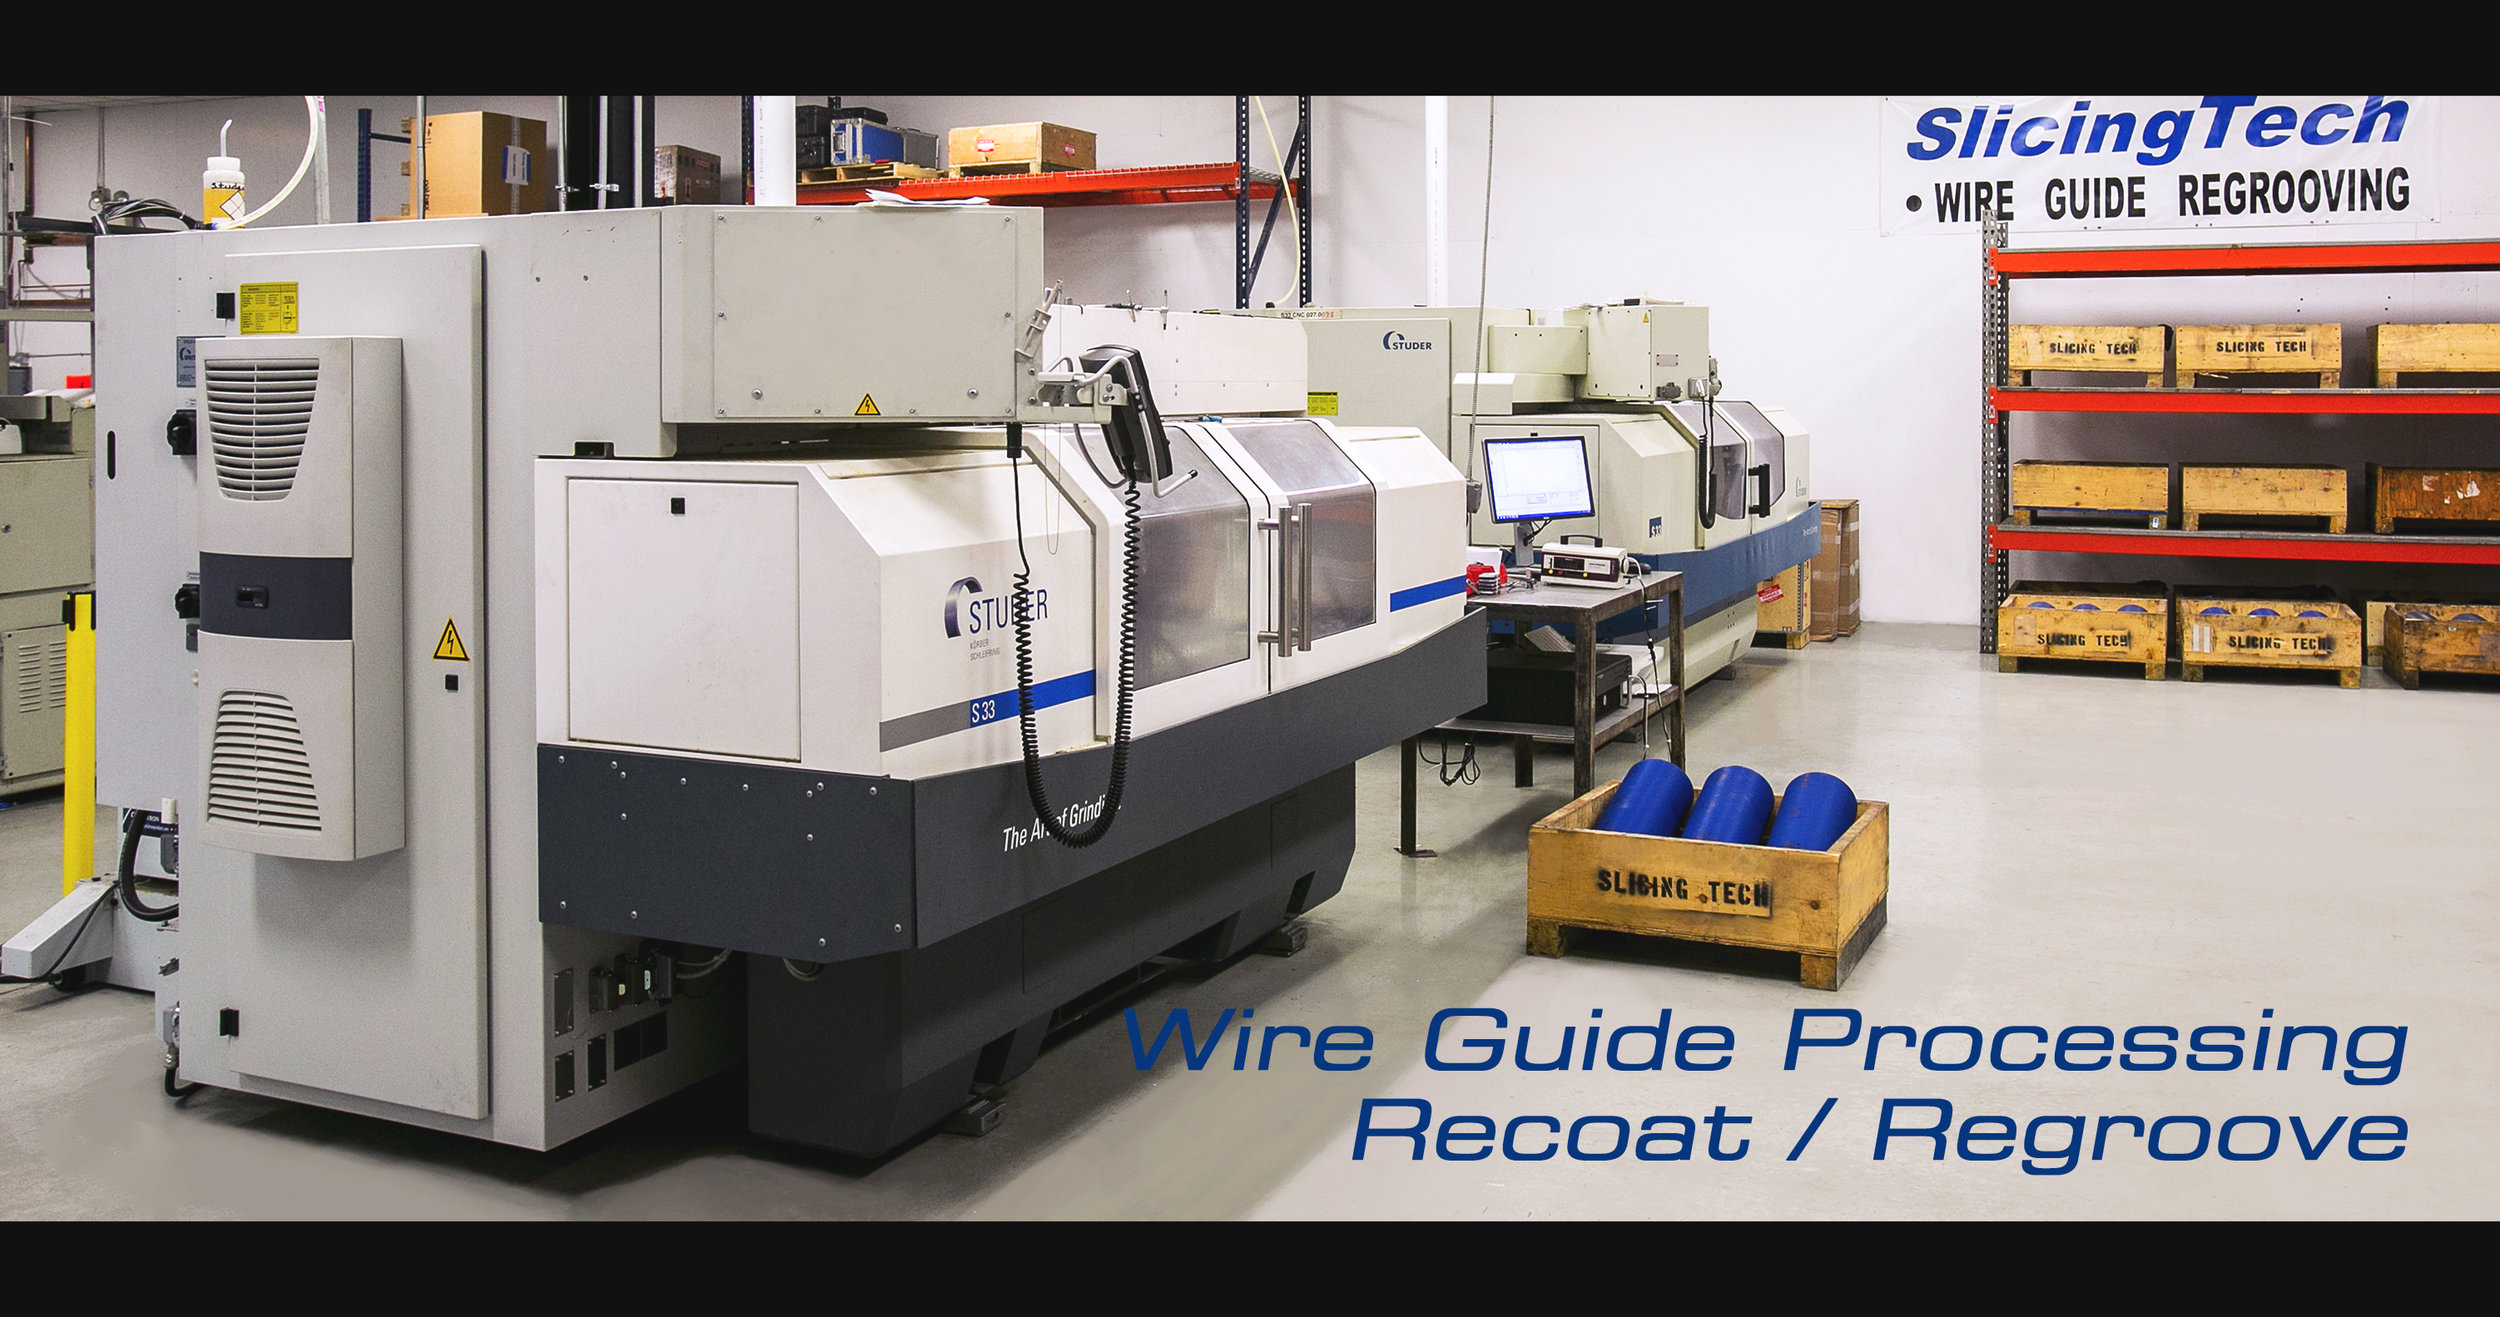 SlicingTech Wire Guide Reprocessing, Recoating and Reproving